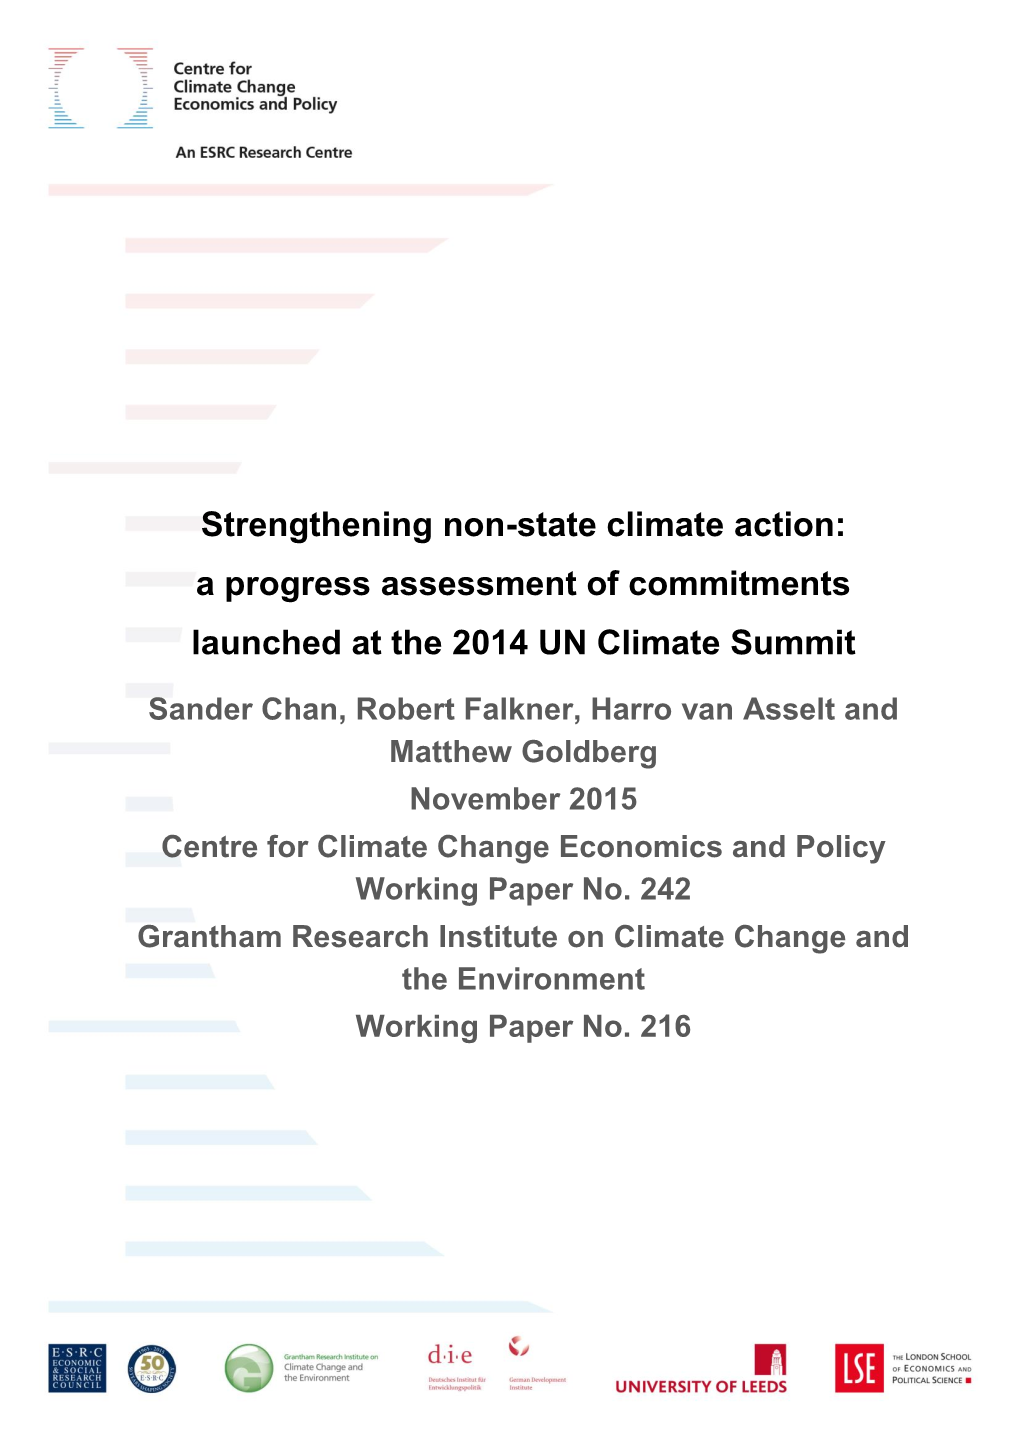 Strengthening Non-State Climate Action: a Progress Assessment of Commitments Launched at the 2014 UN Climate Summit